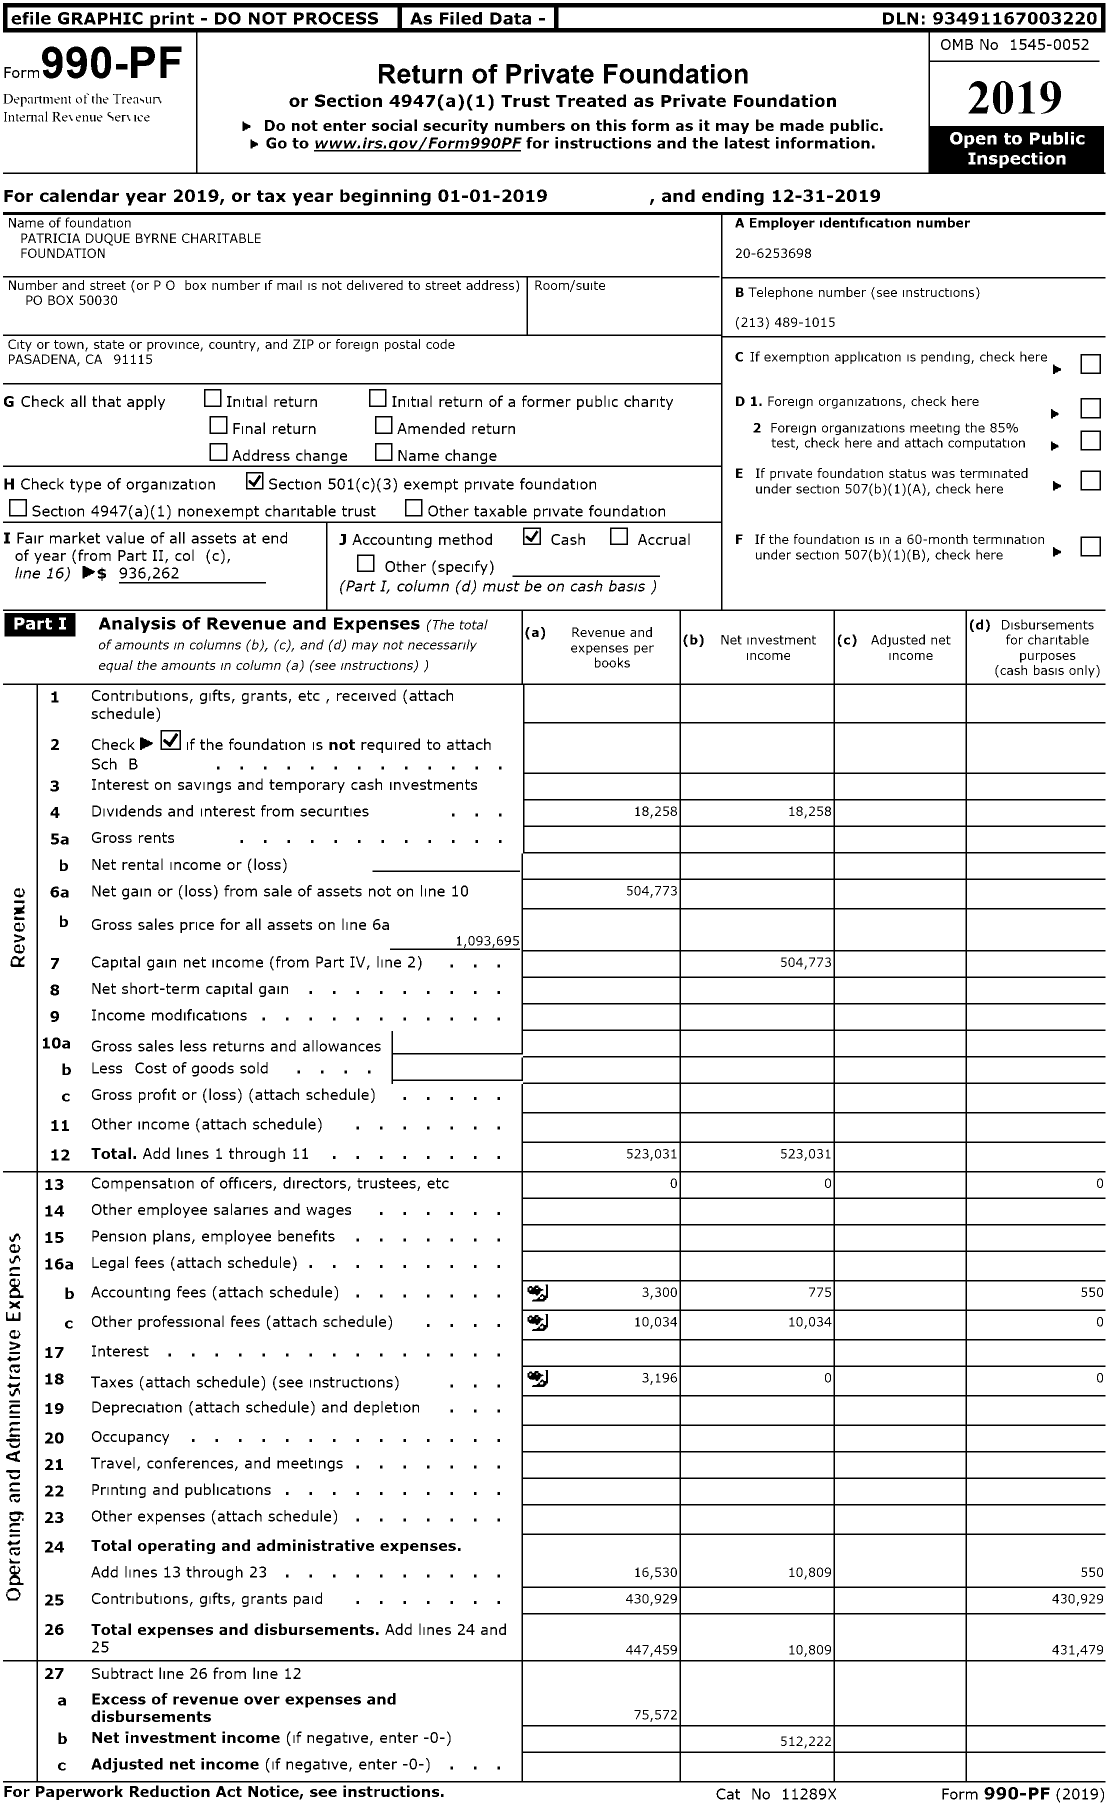 Image of first page of 2019 Form 990PR for Patricia Duque Byrne Charitable Foundation